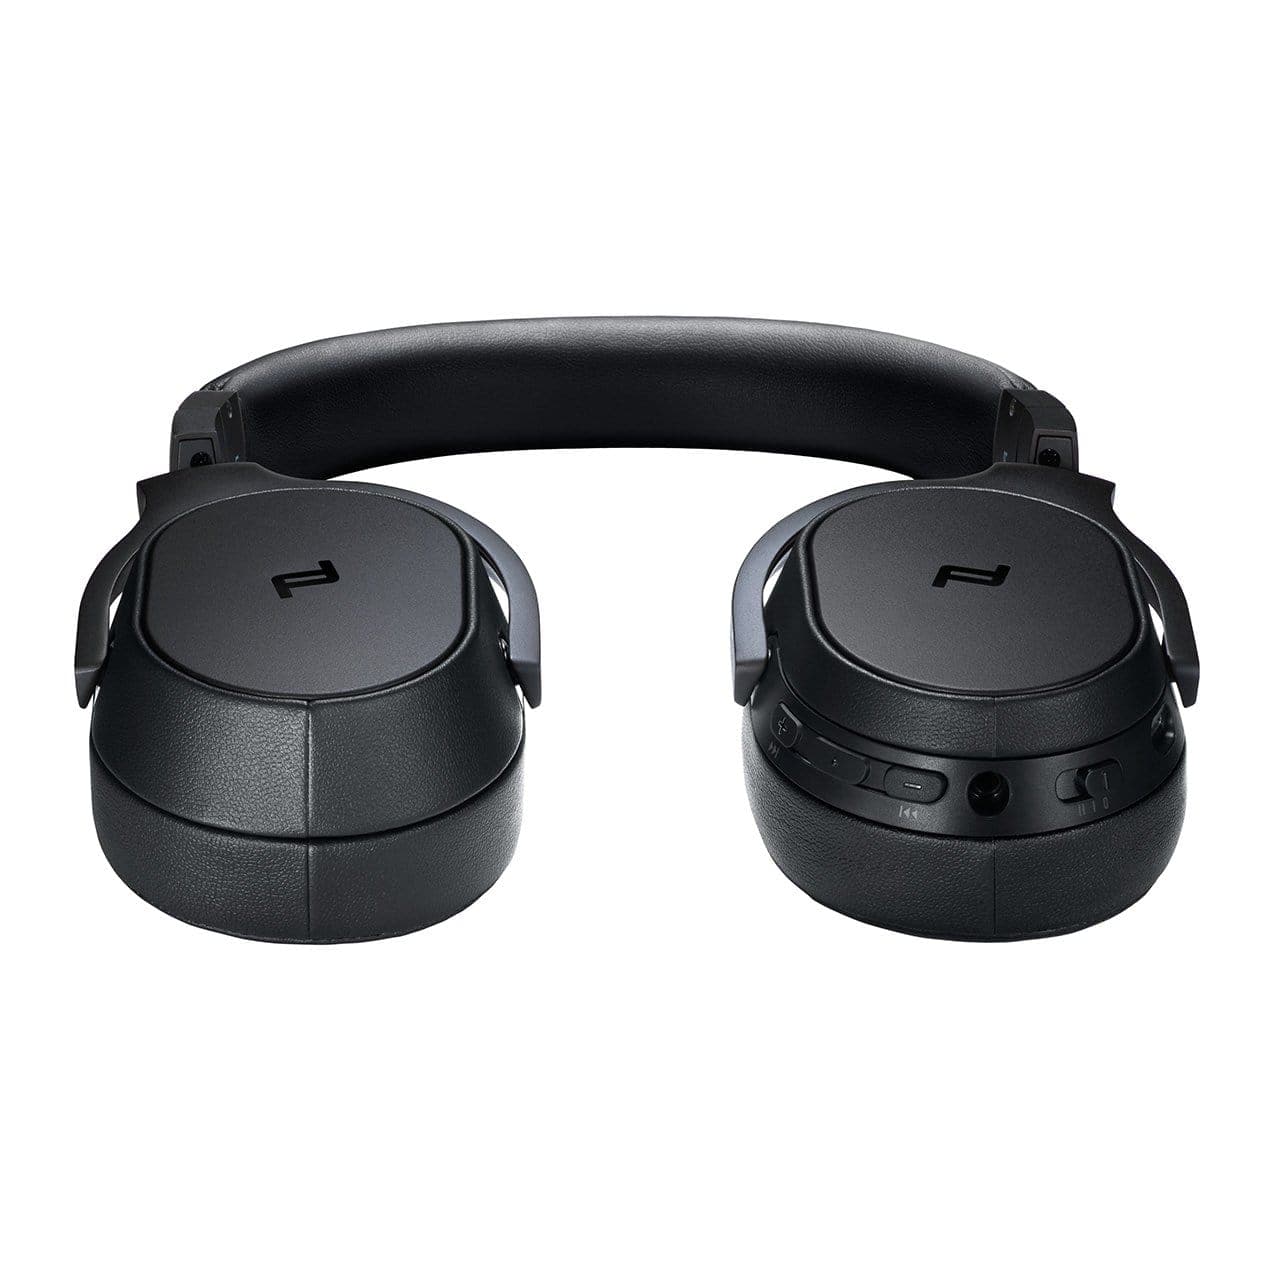 SpaceOne WirelOver-Ear blk - Jashanmal Home